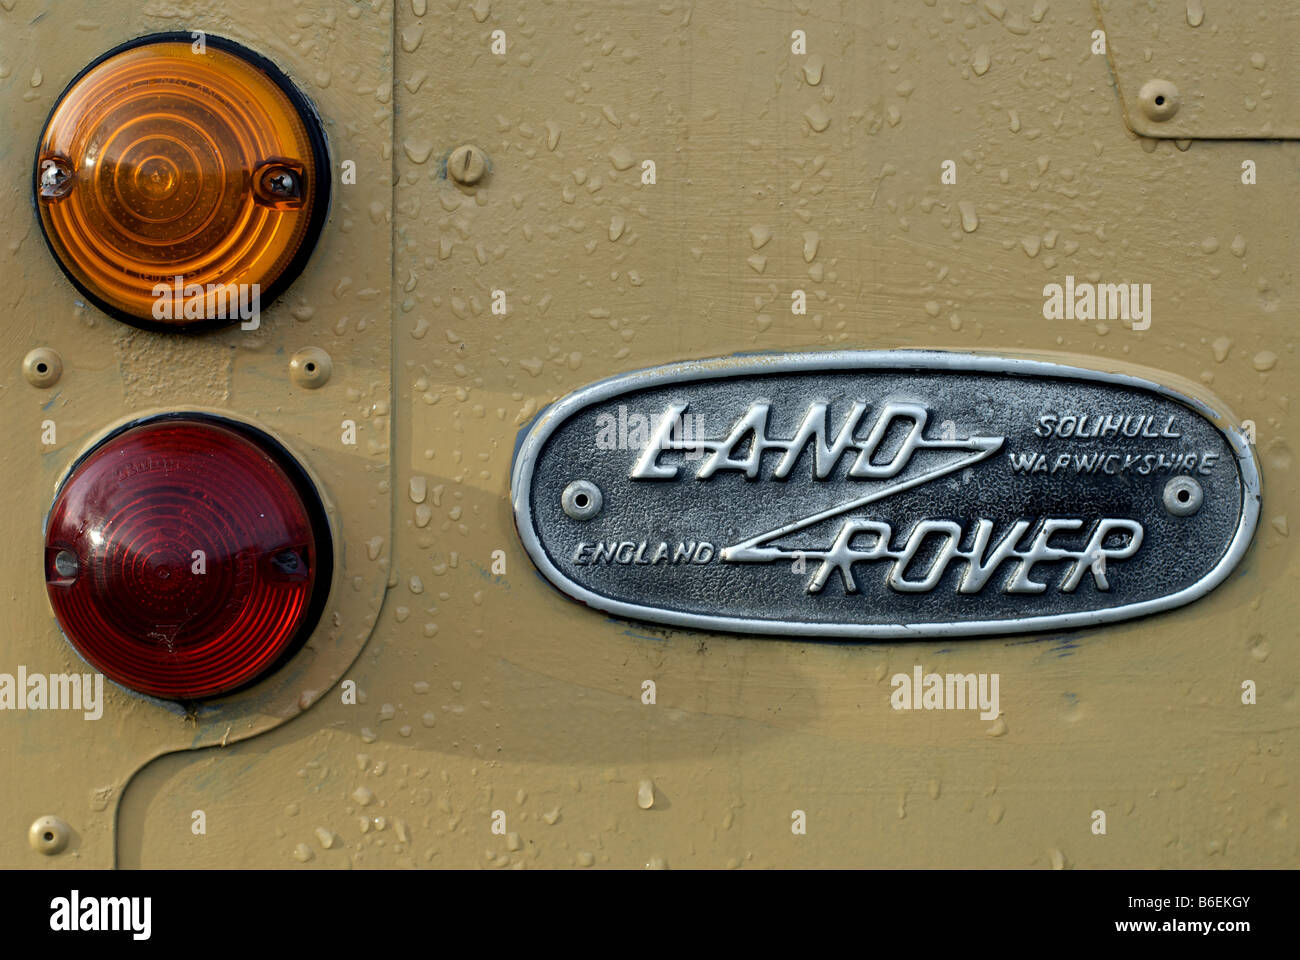 Rear light clusters on a vintage Land Rover motorcar, Suffolk, UK. Stock Photo